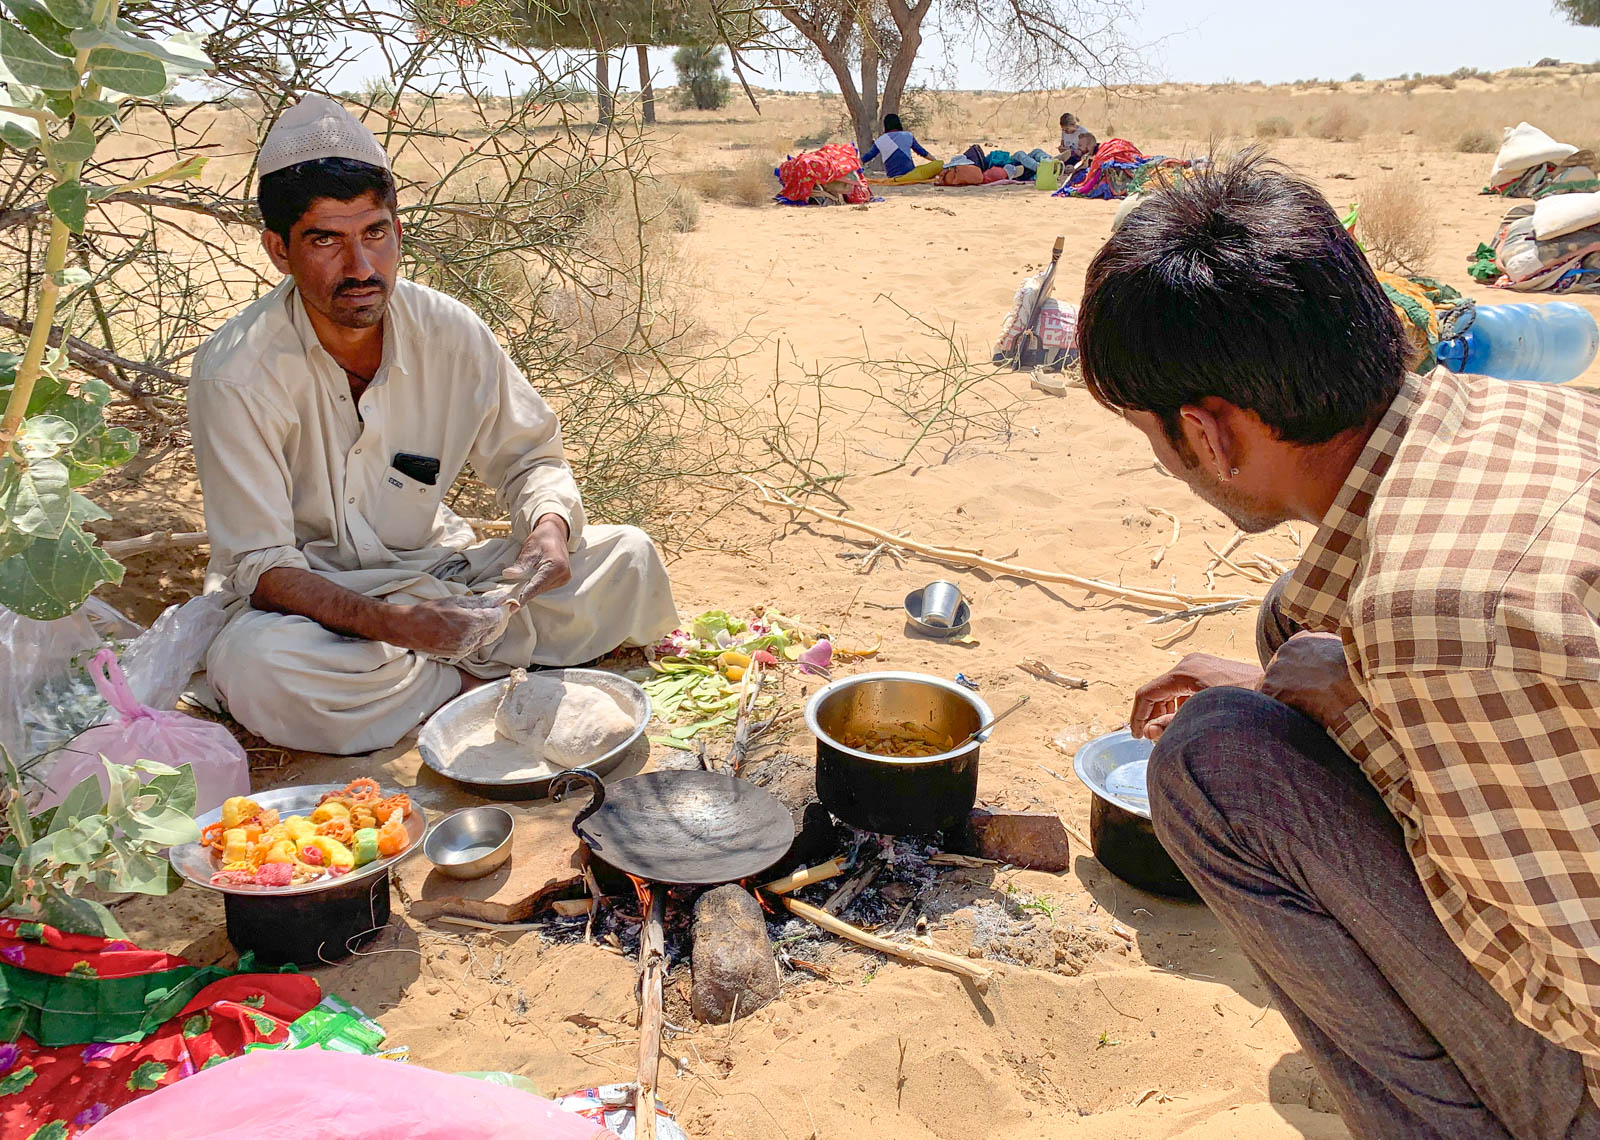 Our camel guides making lunch